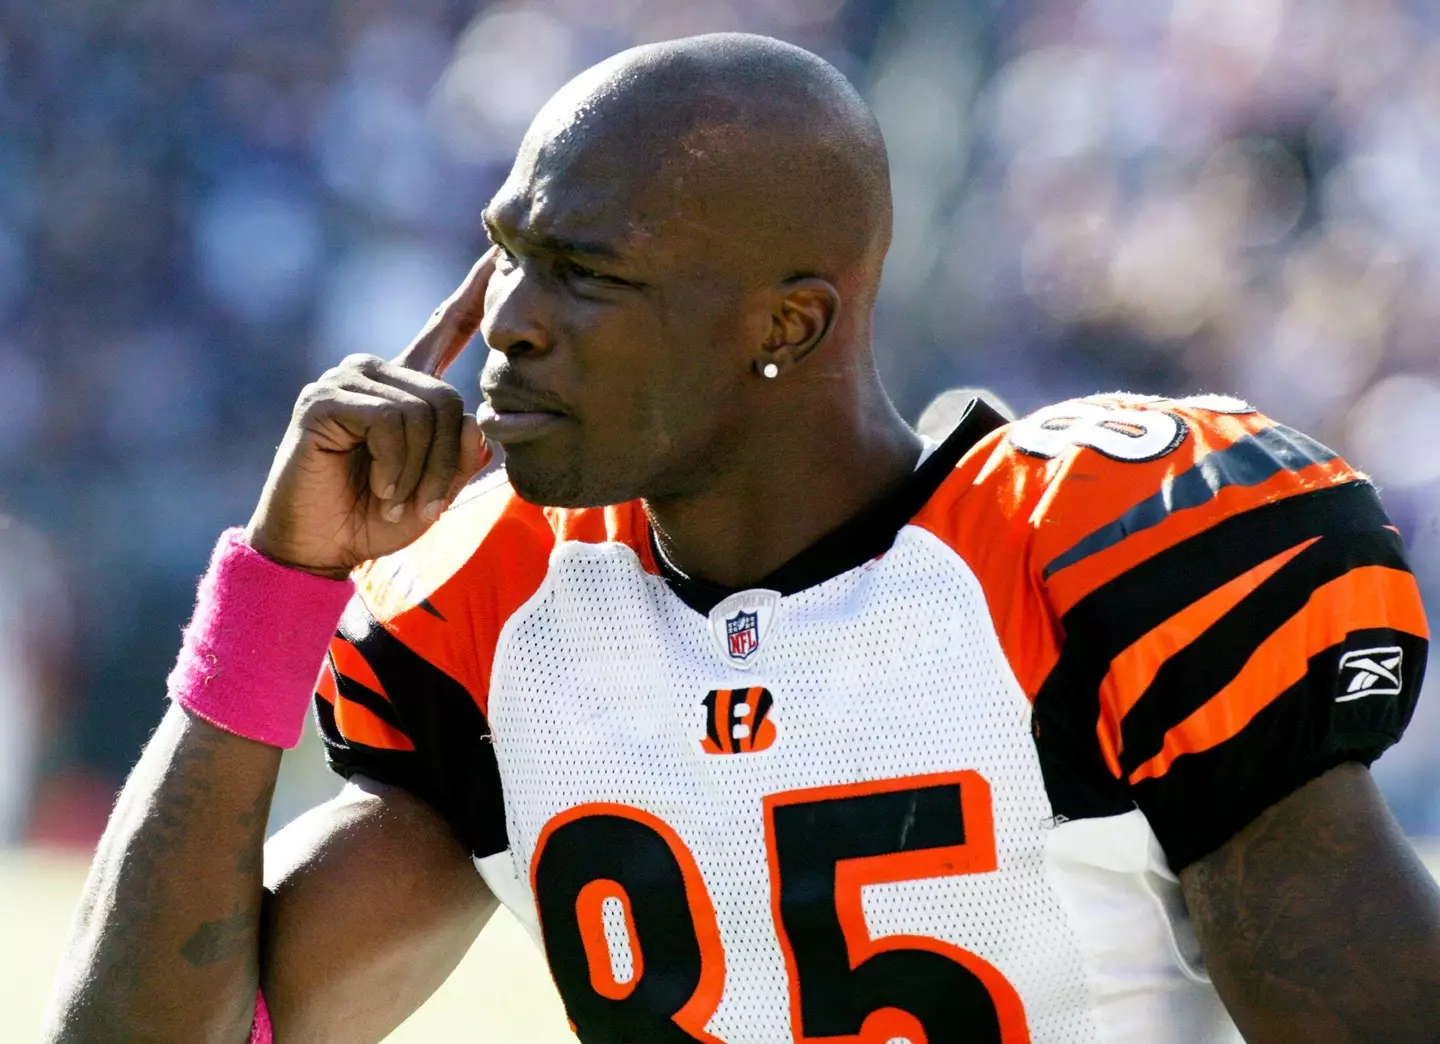 Chad Ochocinco during his NFL years at the Cincinnati Bengals.